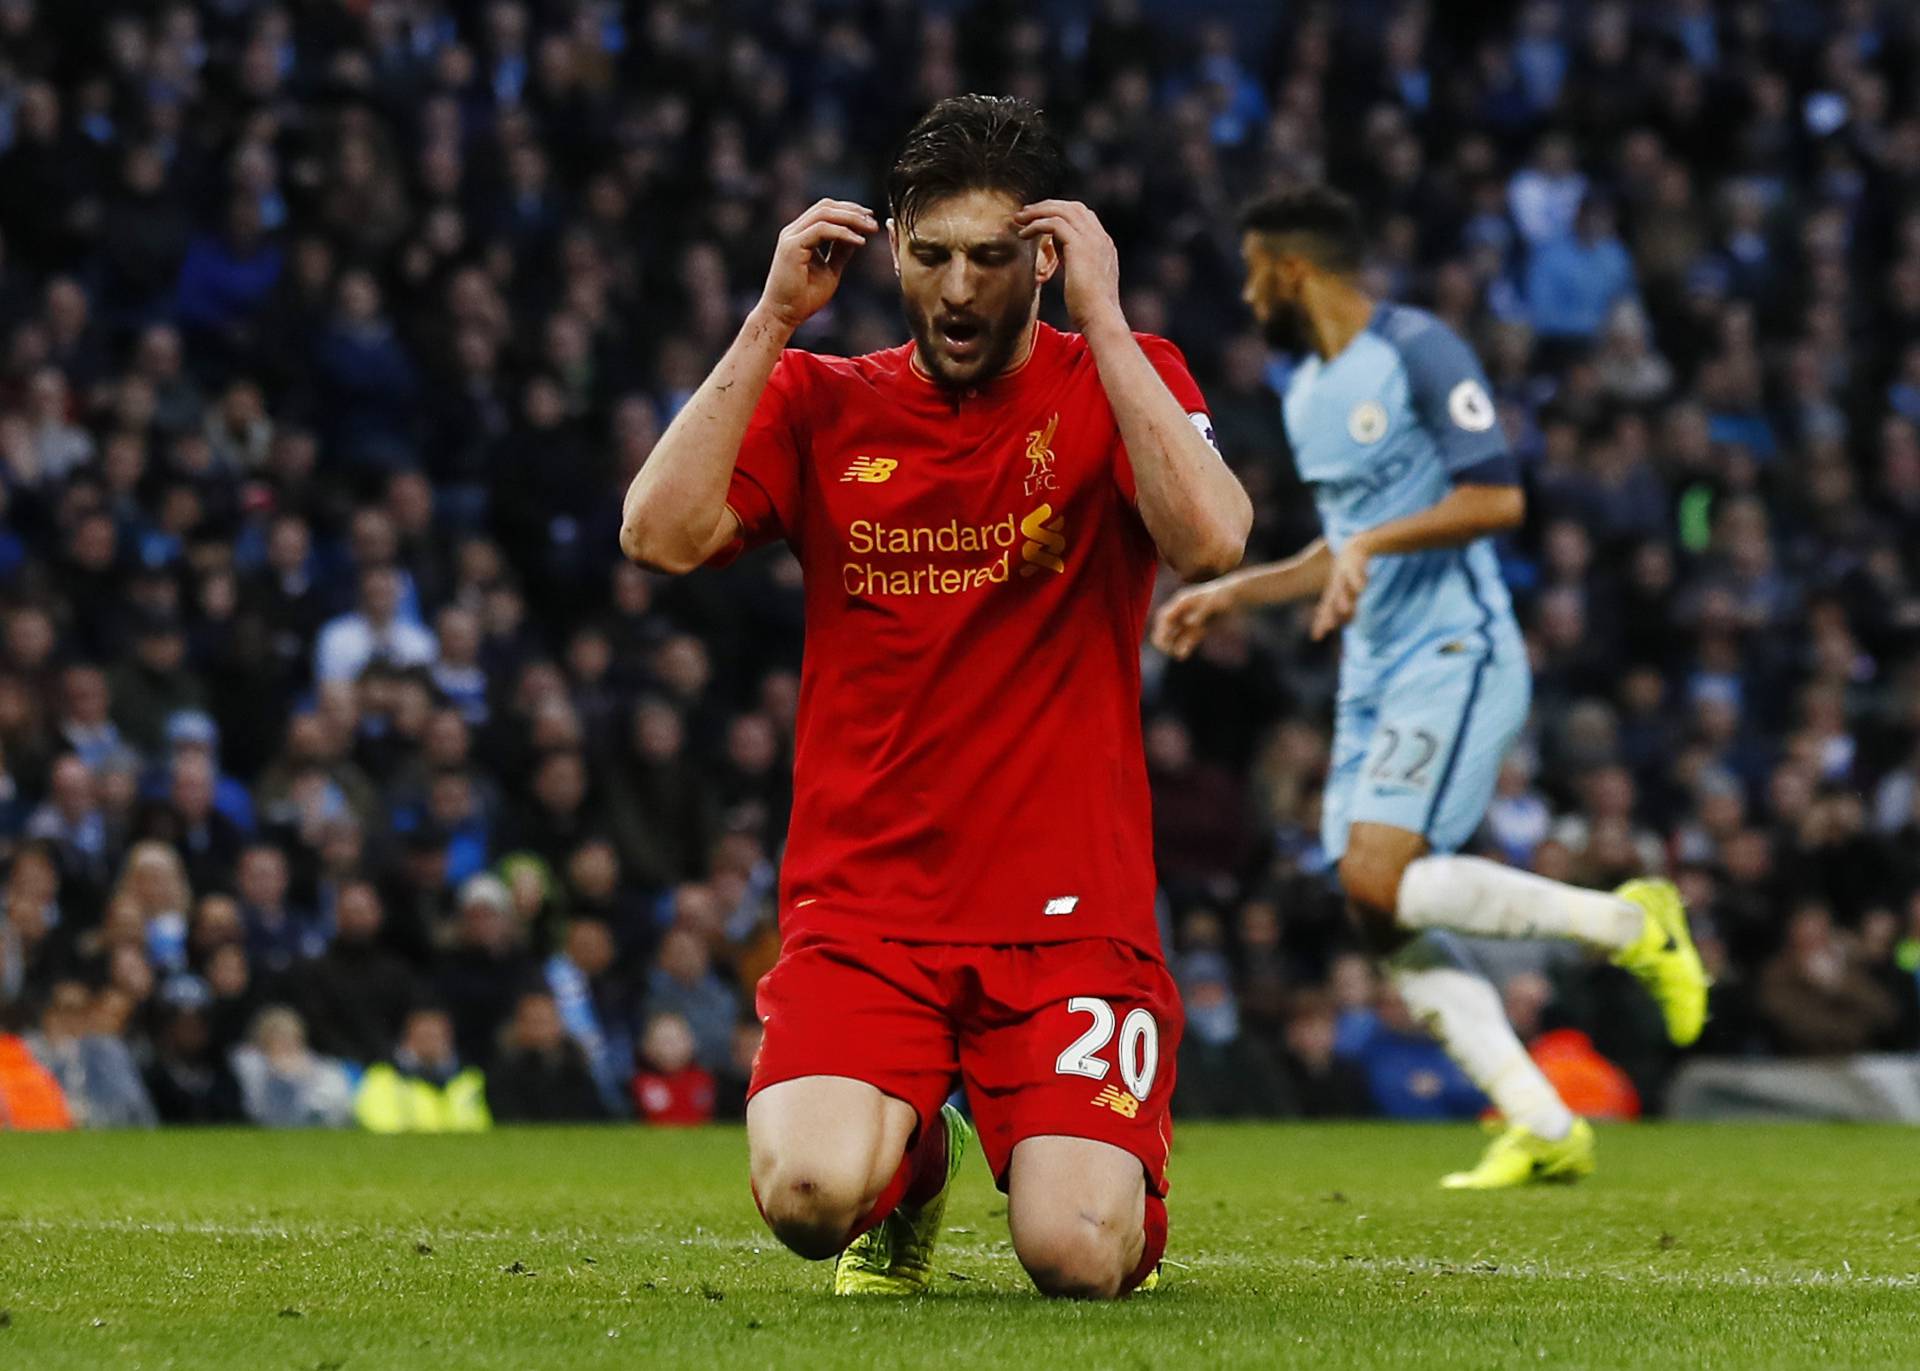 Liverpool's Adam Lallana looks dejected after a missed chance